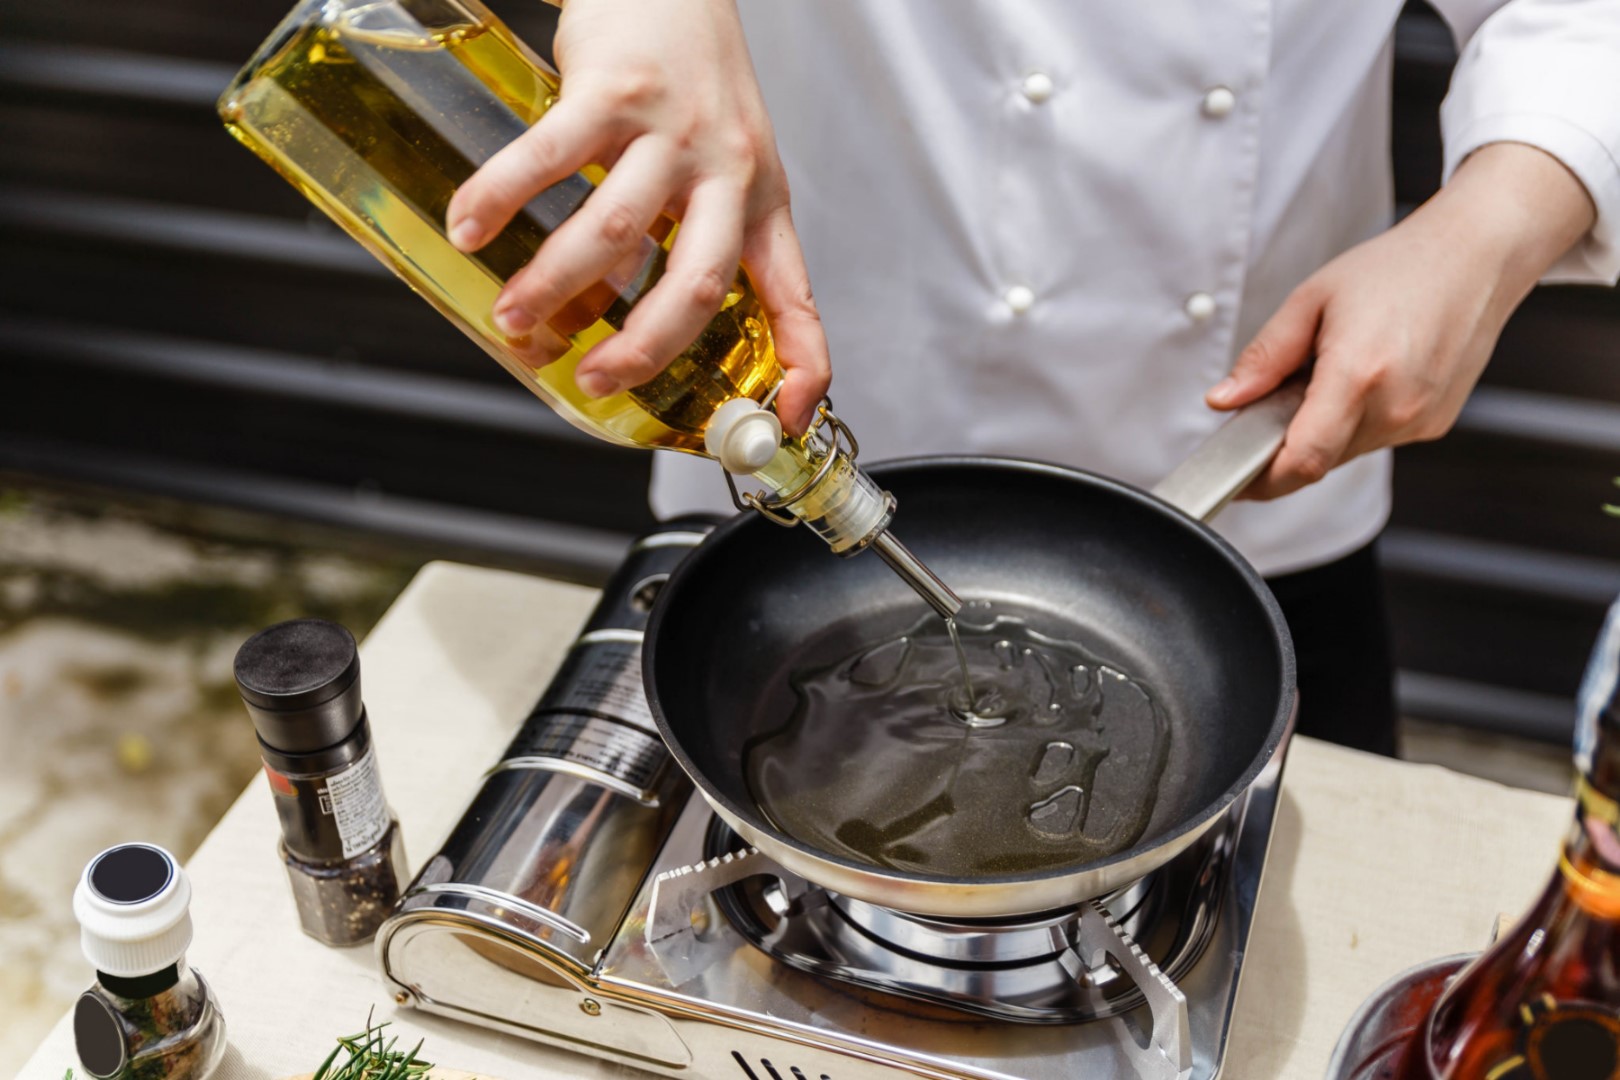 How To Cook With Olive Oil